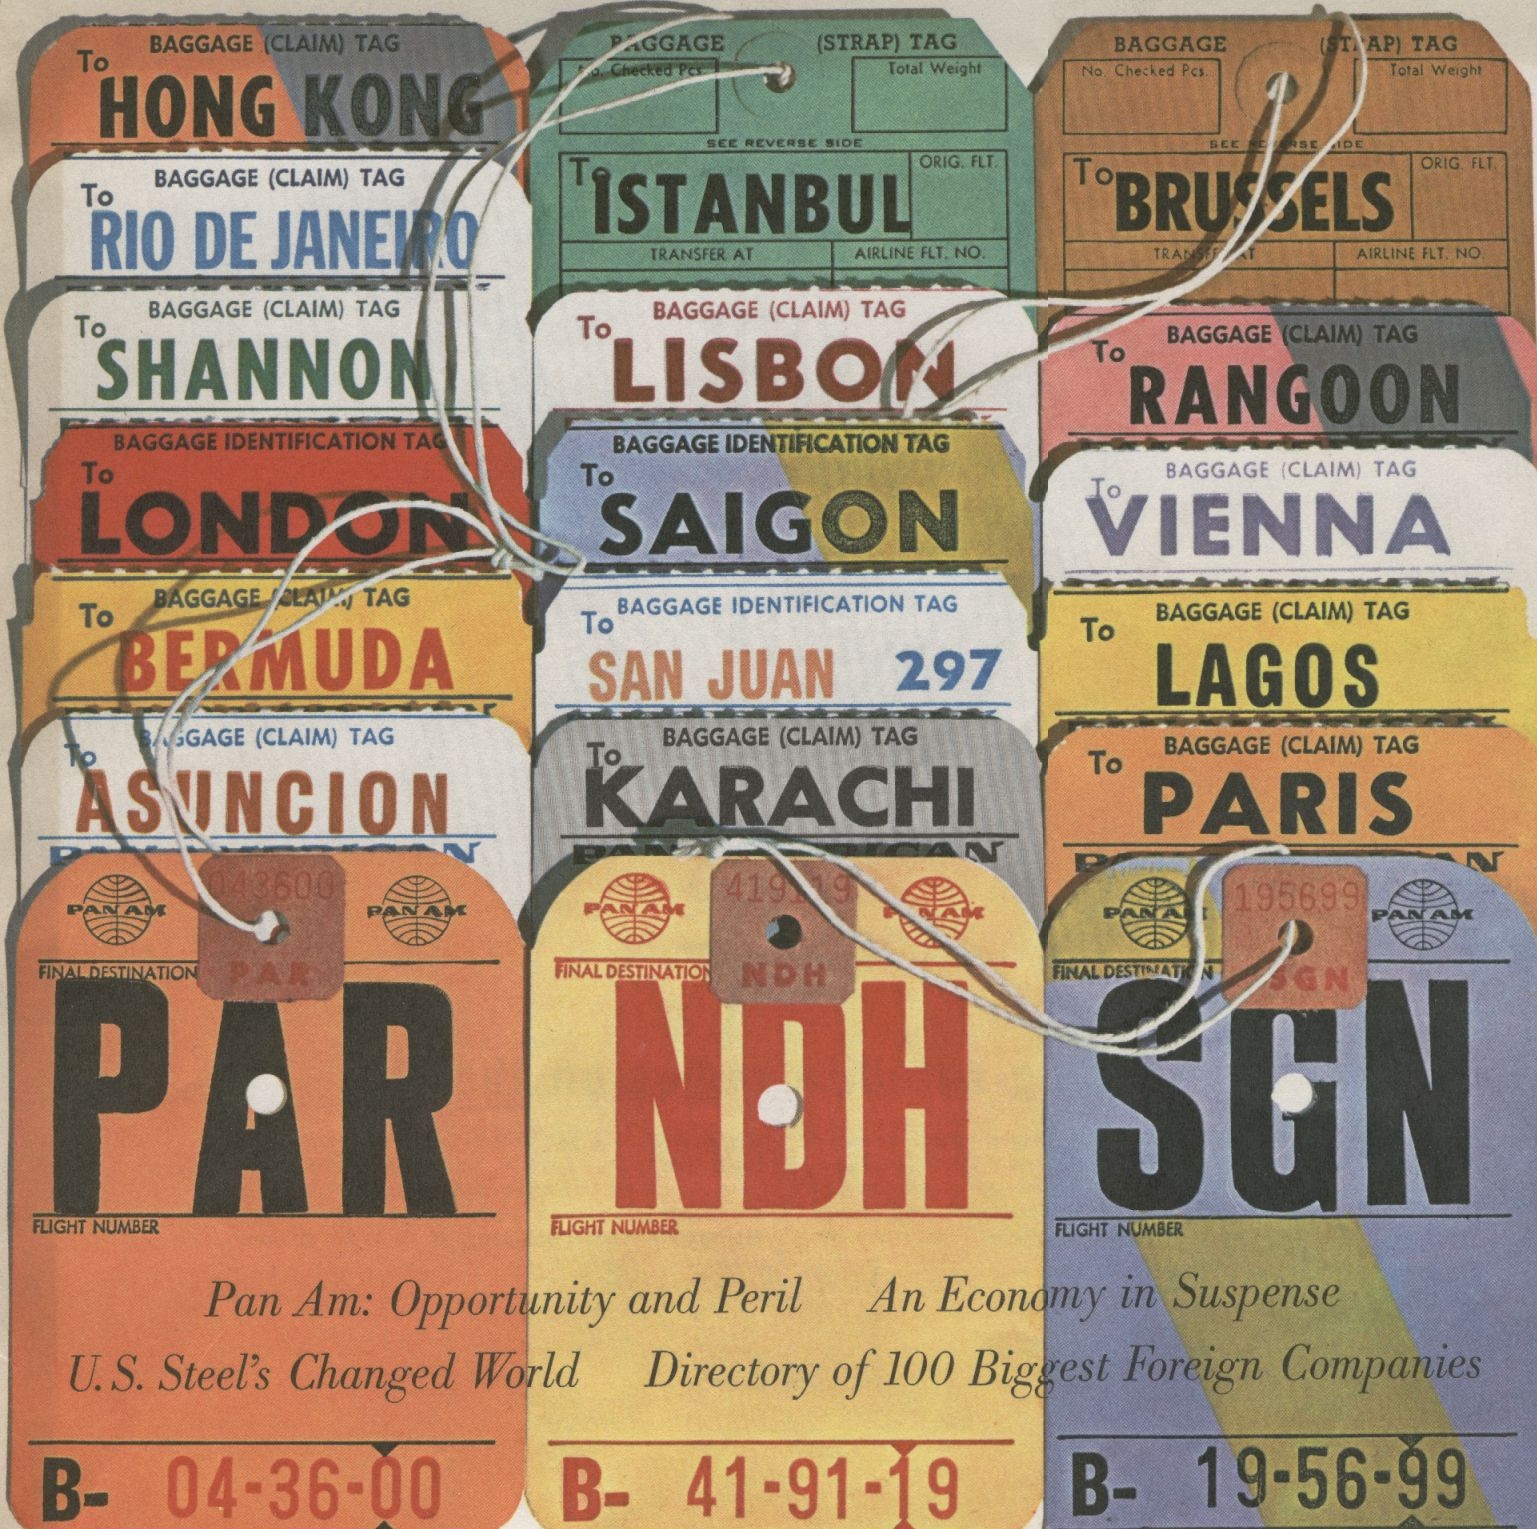 A photograph from the August 1962 issue of Fortune Magazine showing various Pan Am baggage tags.